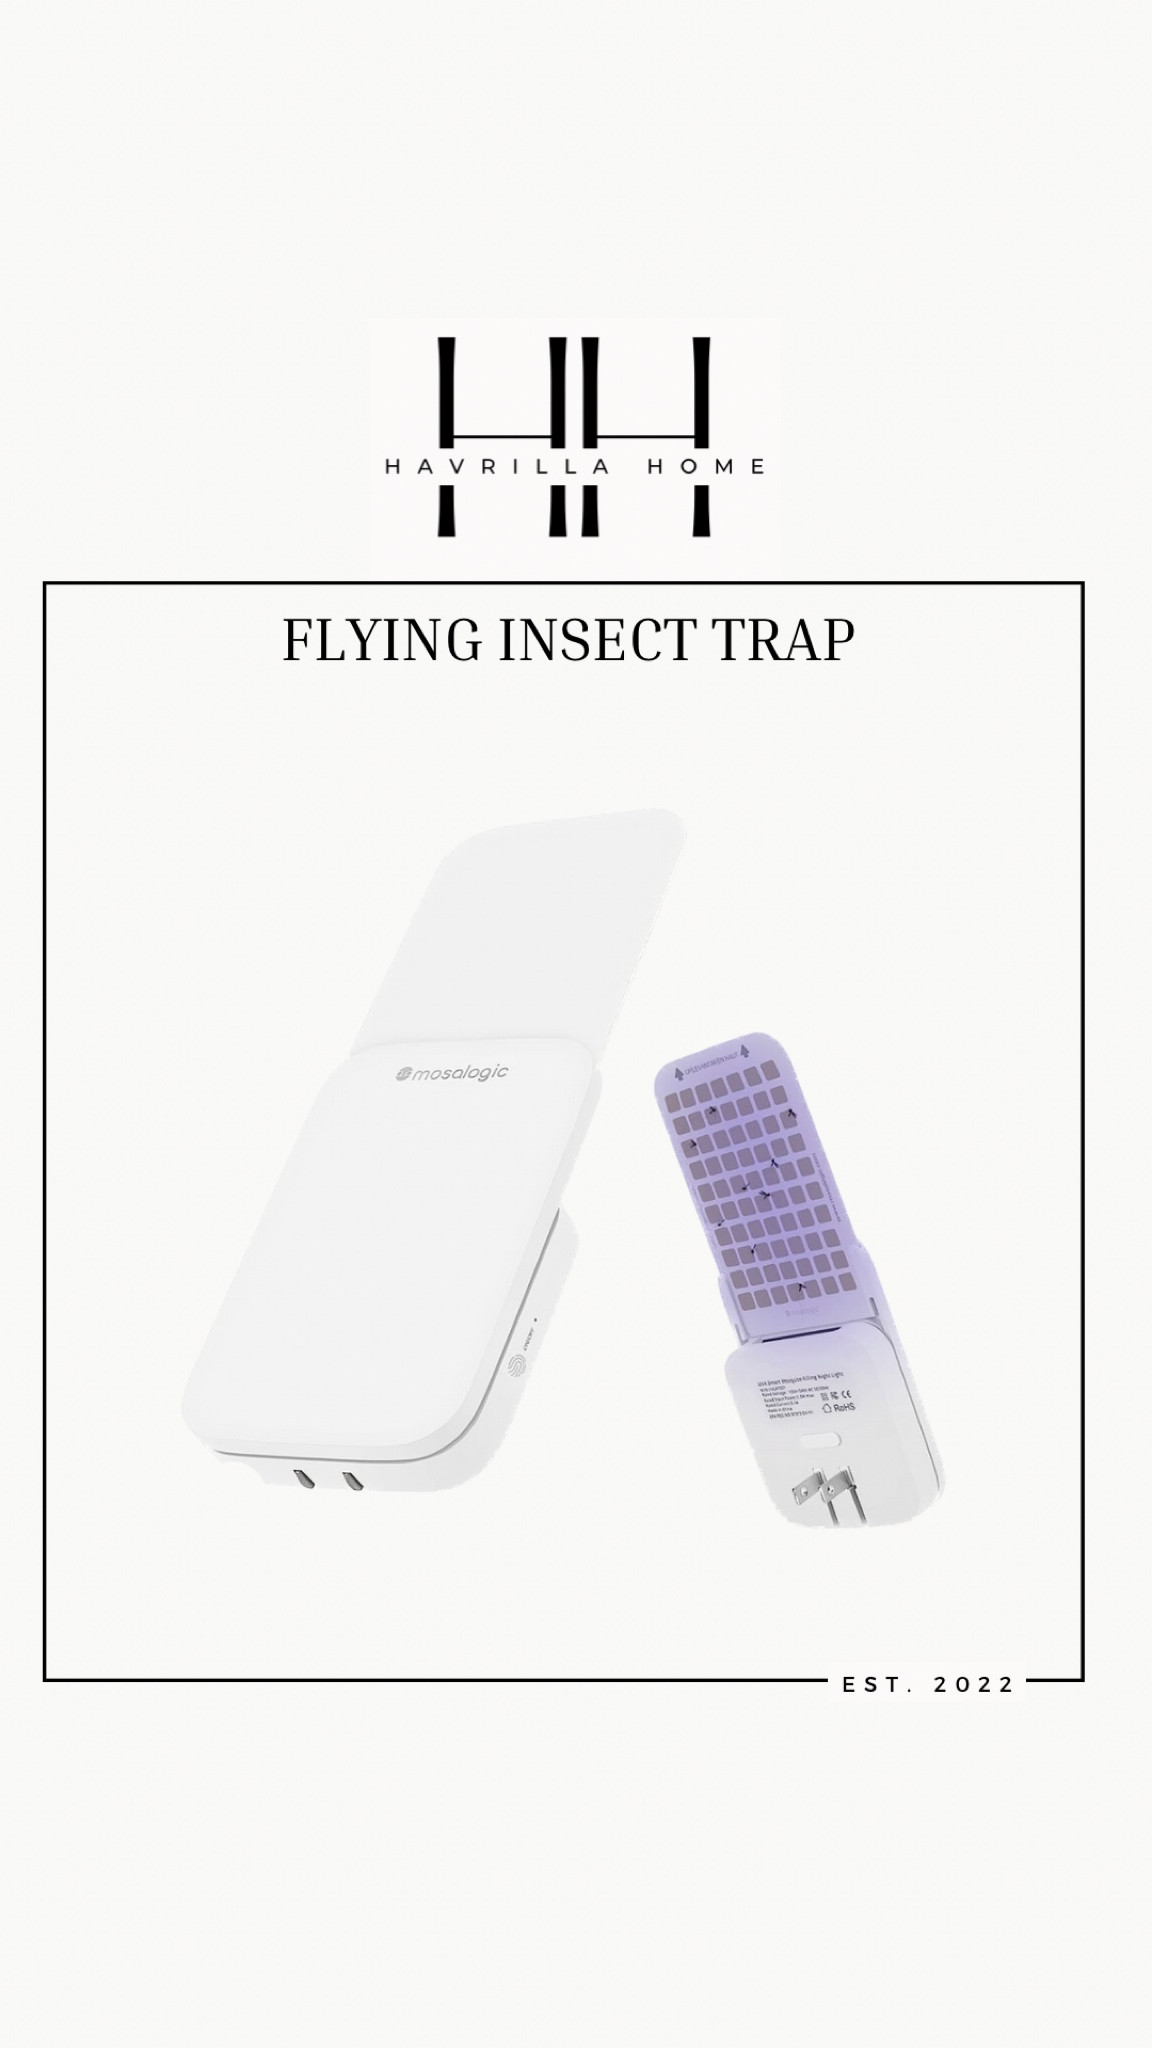 Mosalogic Flying Insect Trap Plug-in Mosquito Killer Indoor Gnat